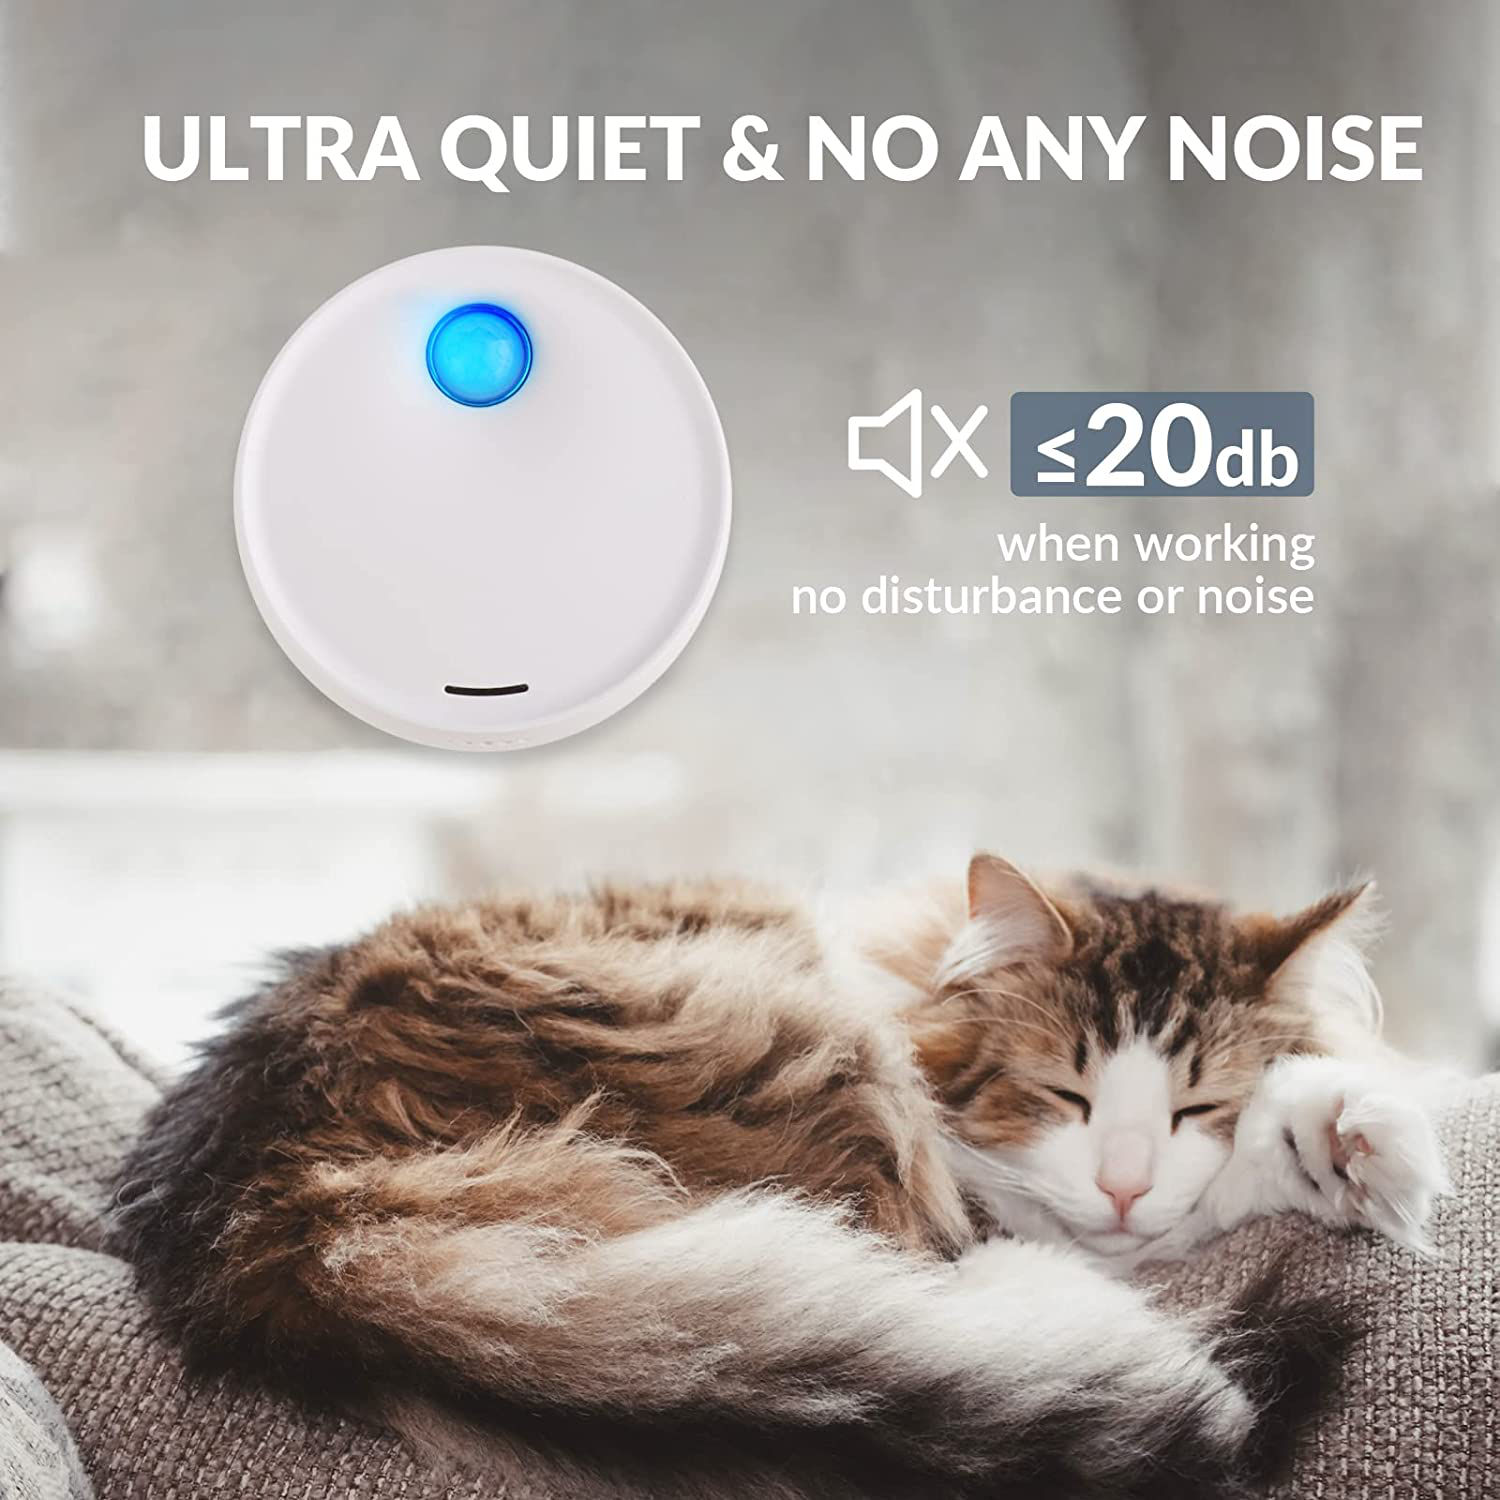 Cat Litter Deodorizer, 3000 Mah Smart Litter Box Eliminator, 360° Monitor Automatic Turn Off/On, 99.9% Deodorization Dust Free Smell Purifier for Litter Box Toilet Kitchen Wardrobe and Small Area